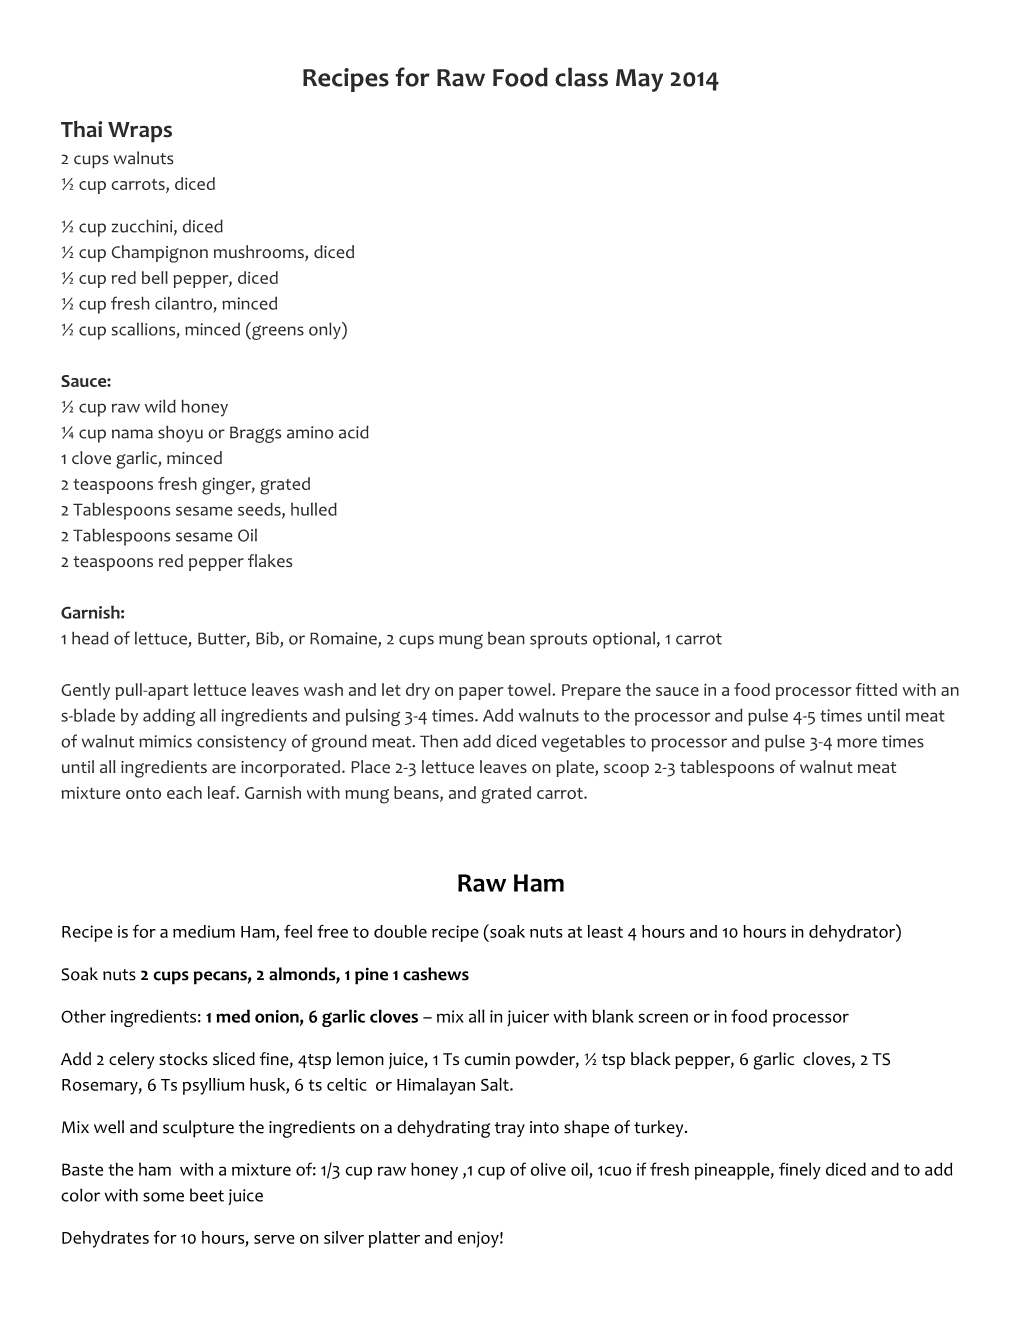 Recipes for Raw Food Class May 2014